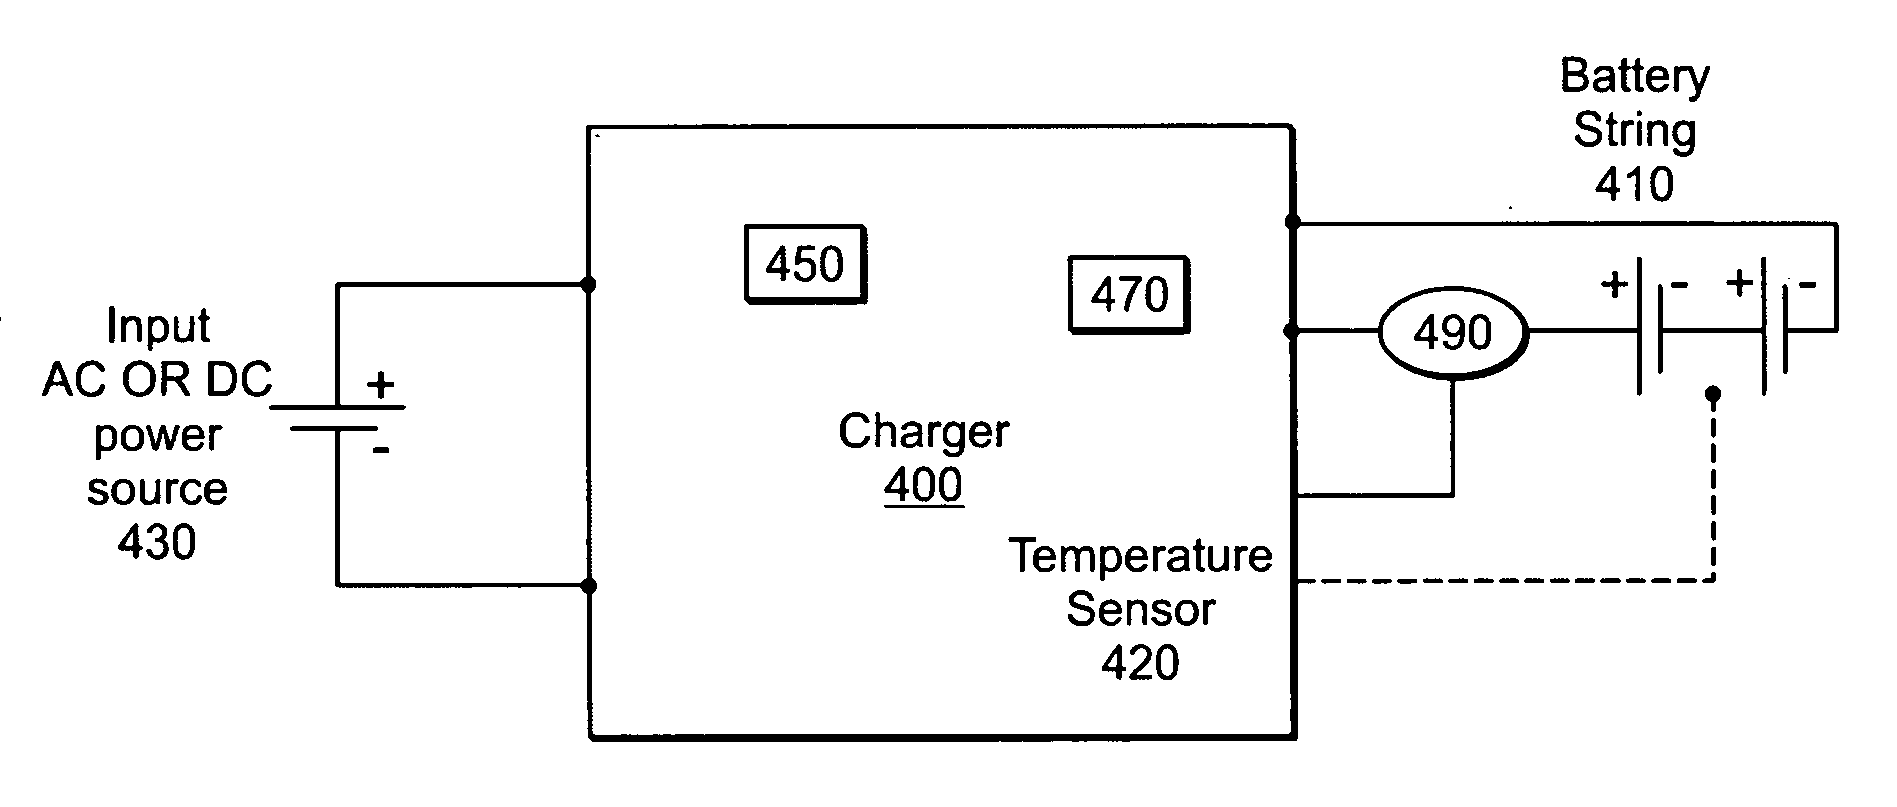 Method For Detecting Cell State-Of-Charge and State-Of-Discharge Divergence Of A Series String of Batteries Or Capacitors